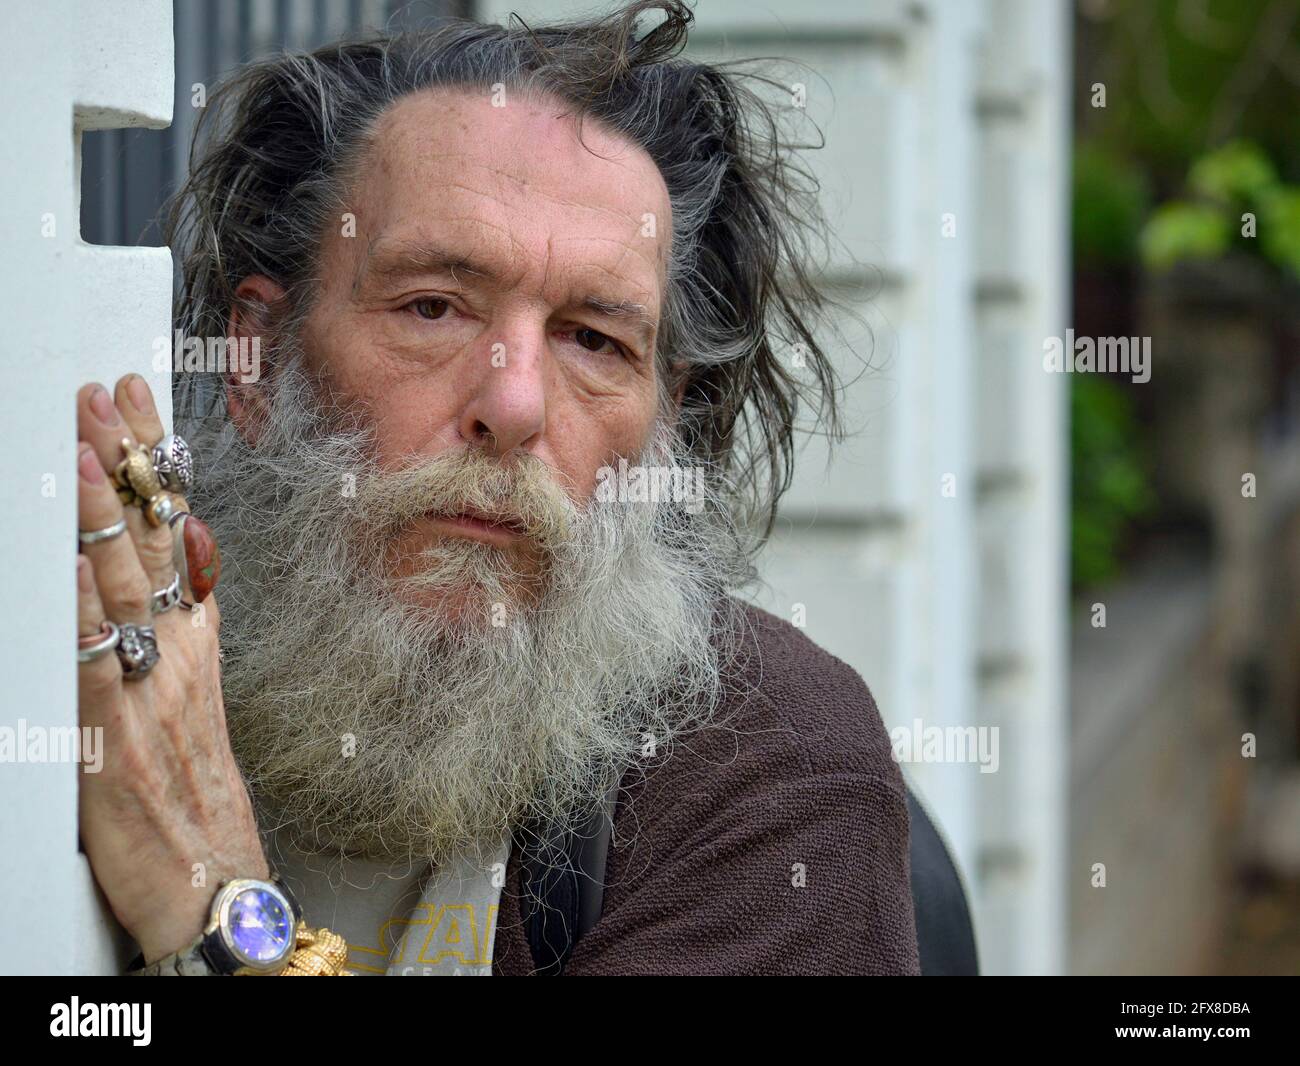 Old emotional dignified Caucasian man with thick beard and disheveled hair hides behind a wall, looks at the viewer and shows the rings on his hand. Stock Photo